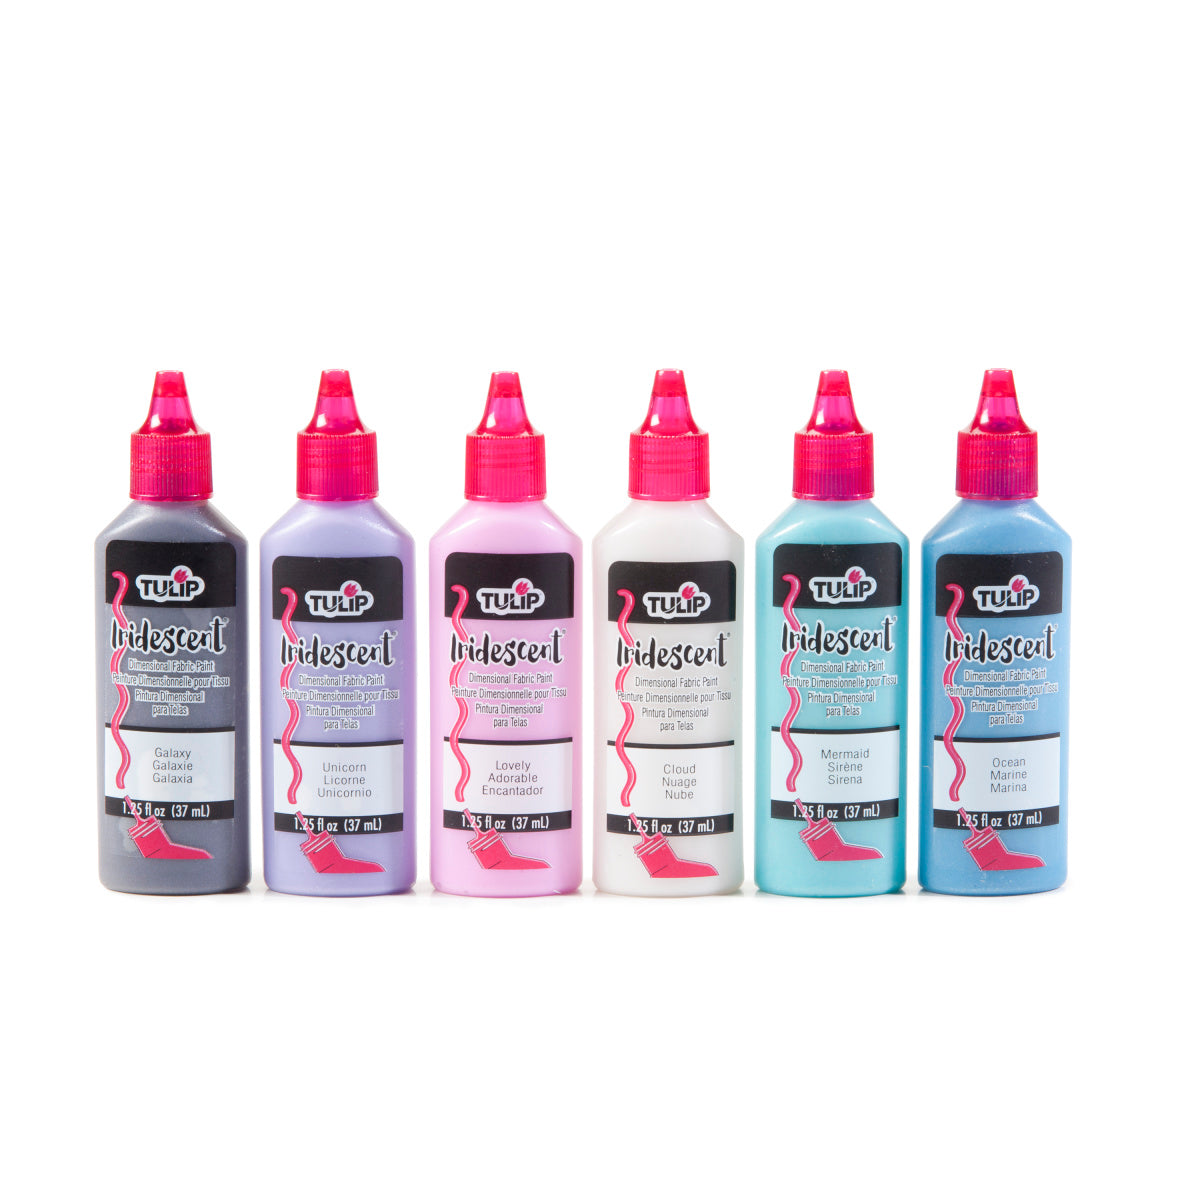 Iridescent Dimensional Fabric Paint - 6 Pack